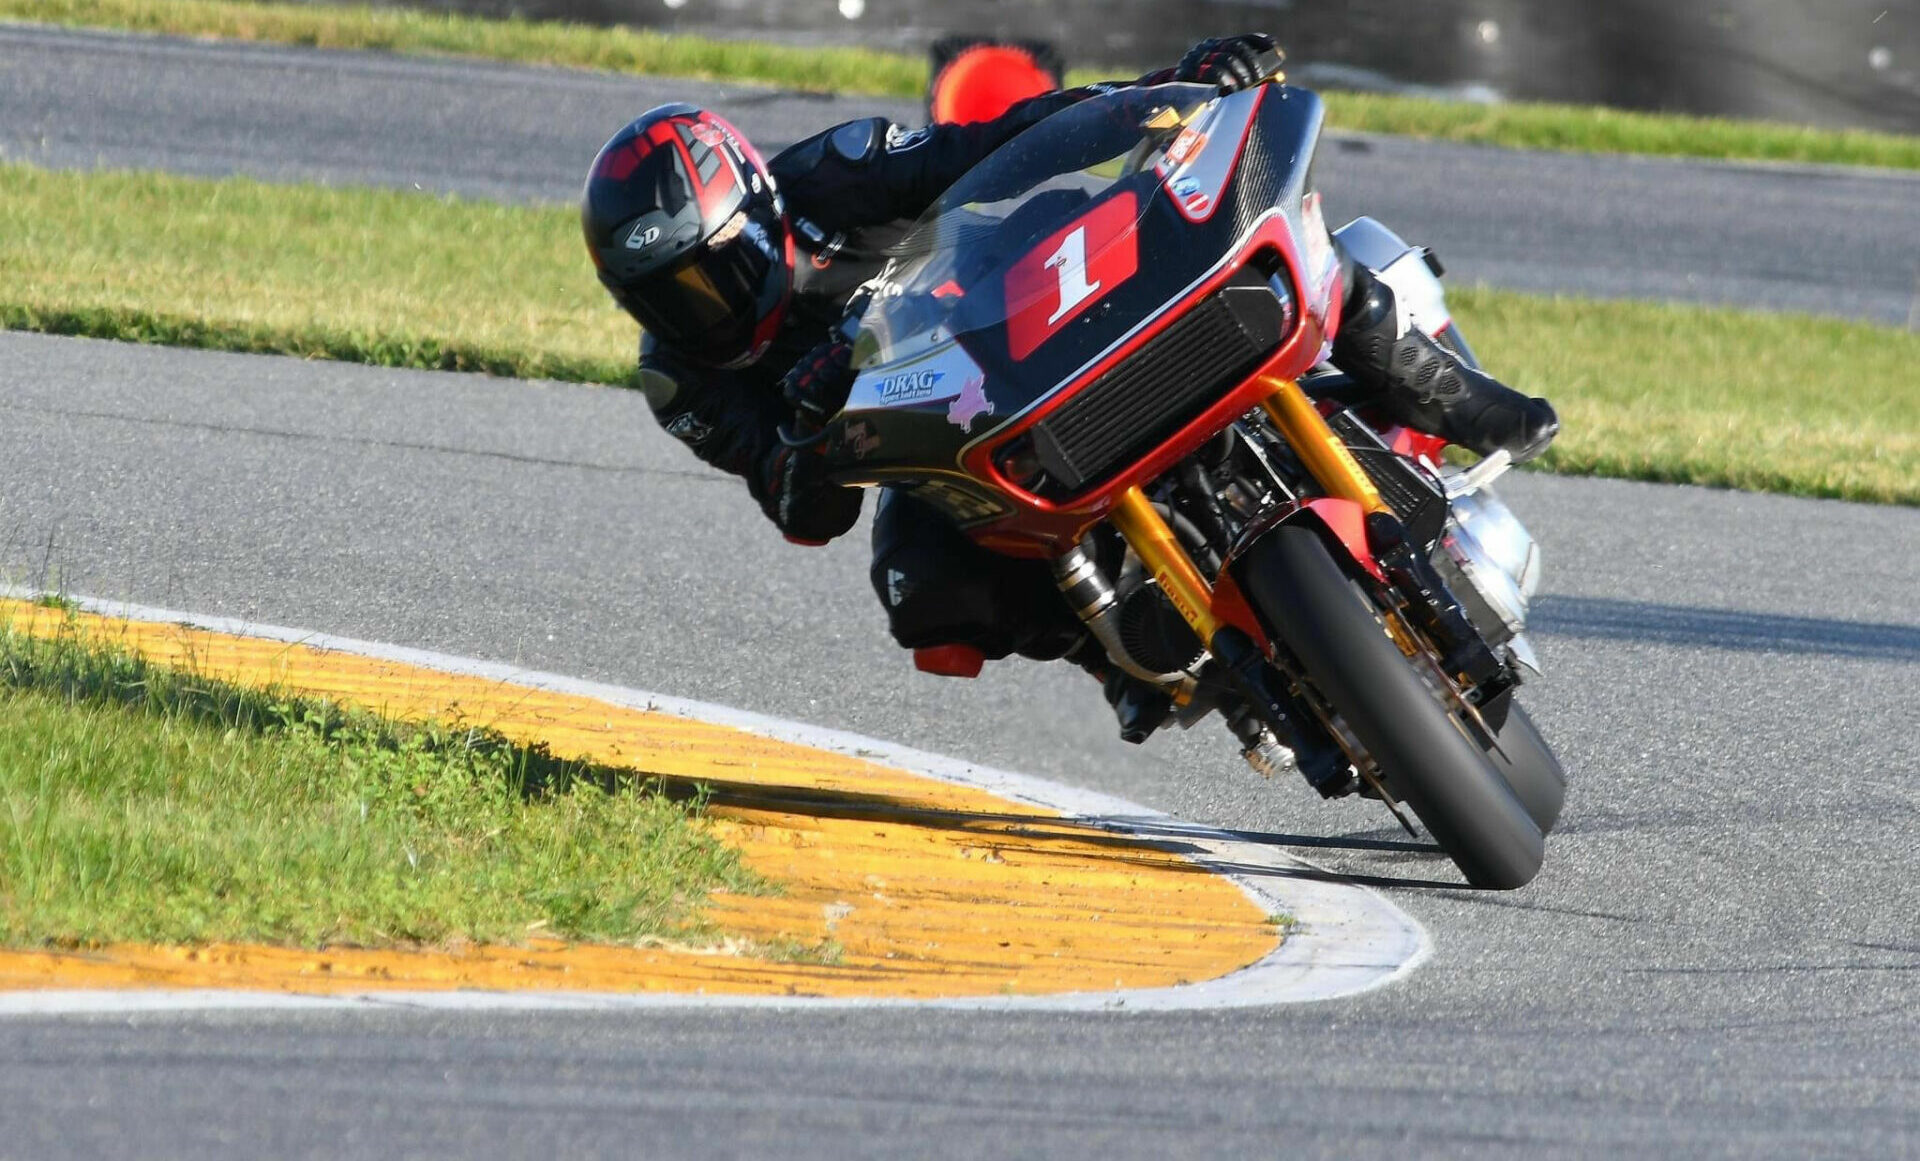 Shane Narbonne (1) captured his second consecutive Bagger GP class title in Daytona. Photo courtesy Pirelli.